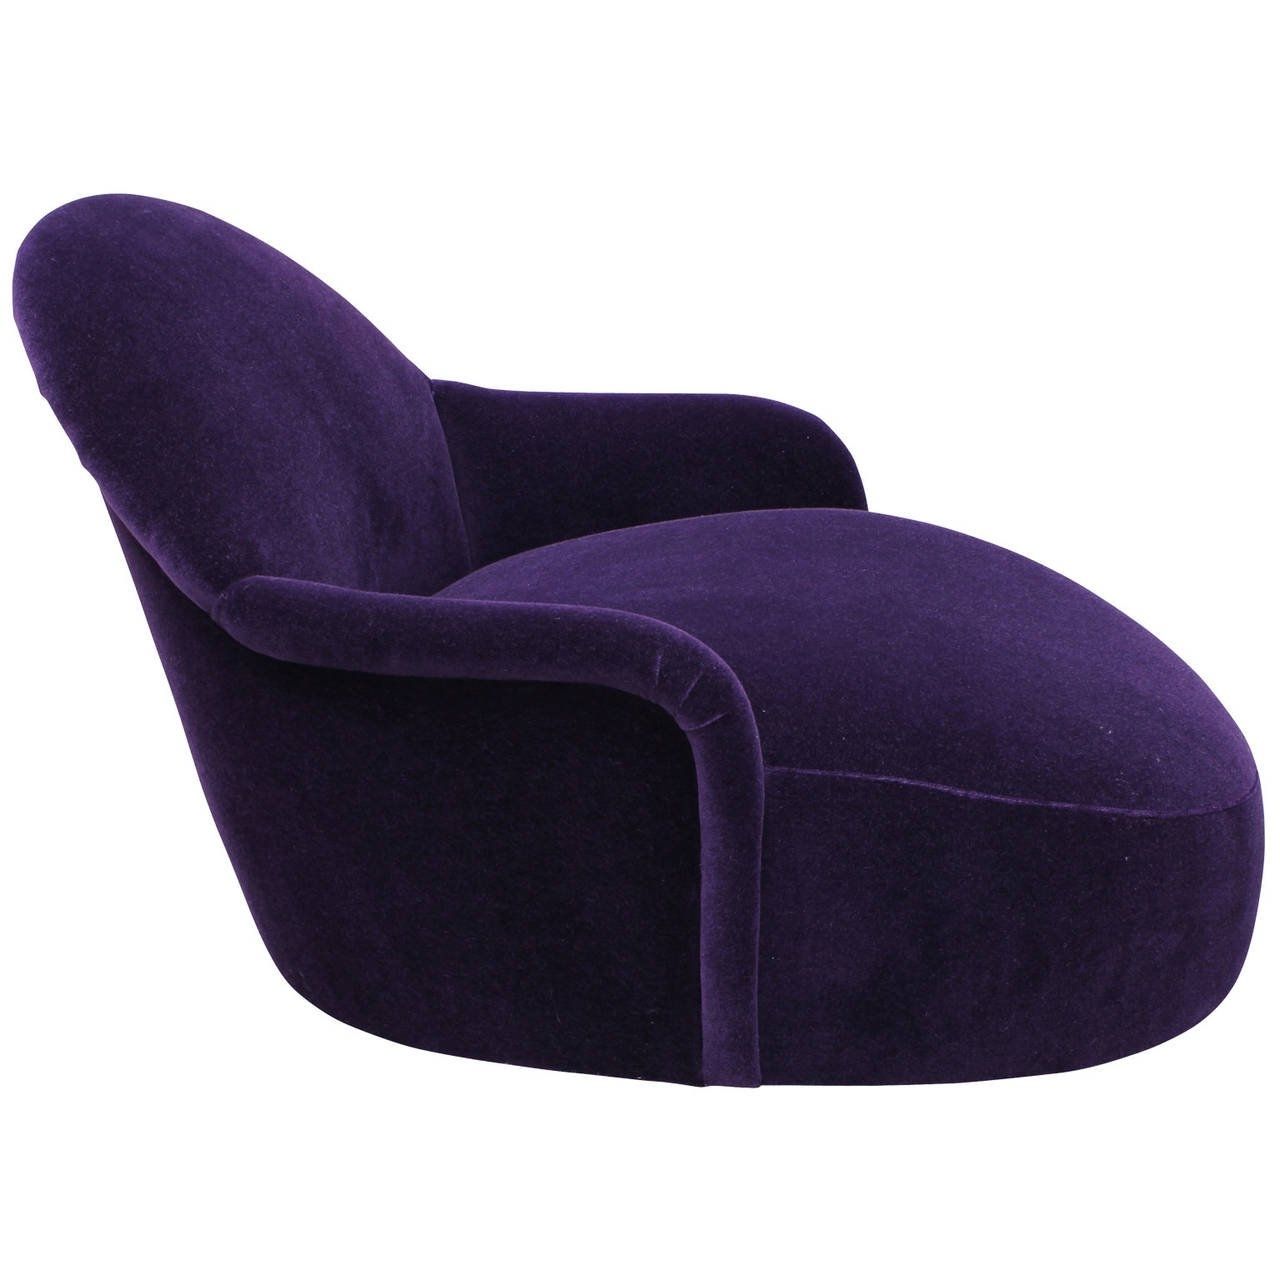 Popular Purple Chaise Lounges With Incredible Milo Baughman Swivel Chaise In Purple Mohair Velvet At (View 10 of 15)